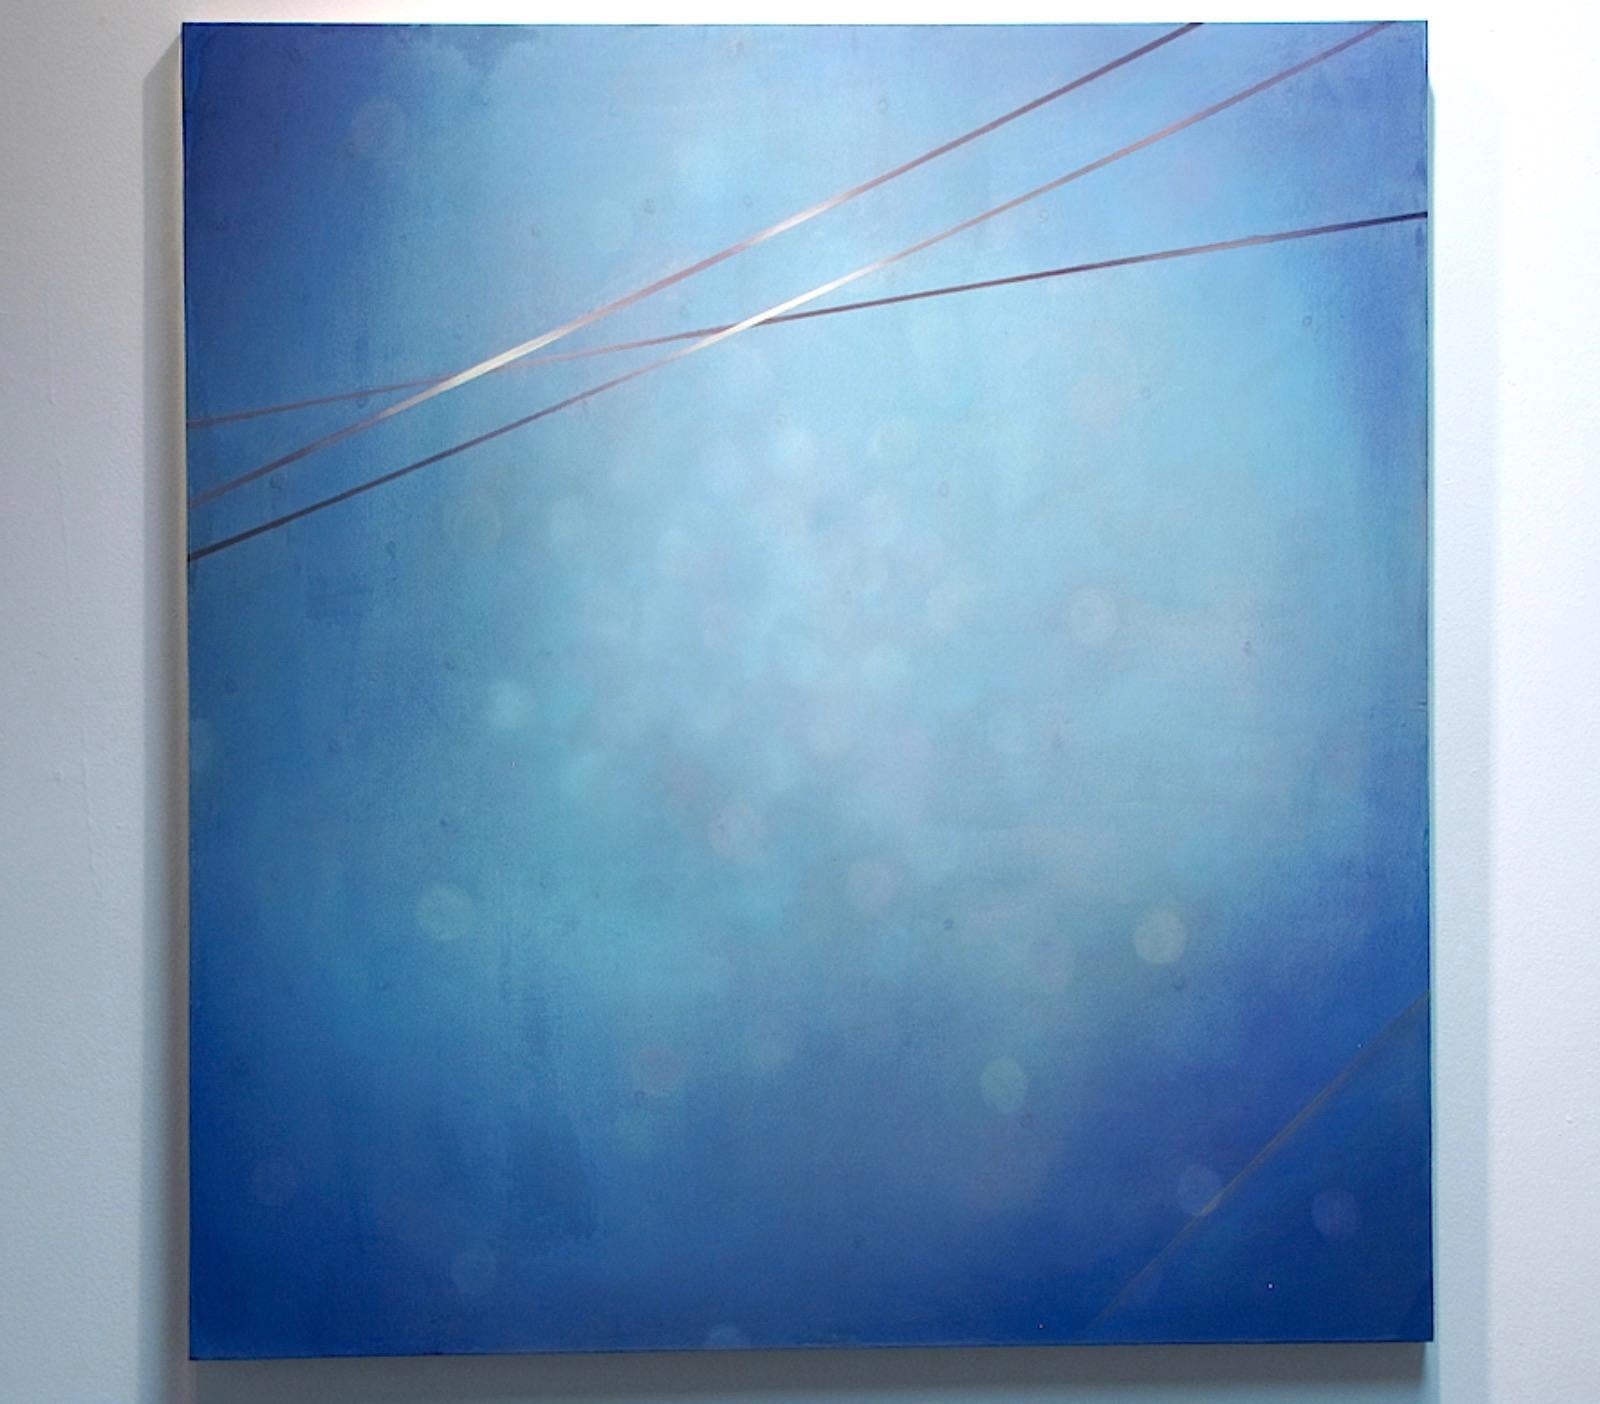 Composition in Blue #2 - acrylic, oil on polyester mesh - royal blue light  - Painting by Heather Hartman